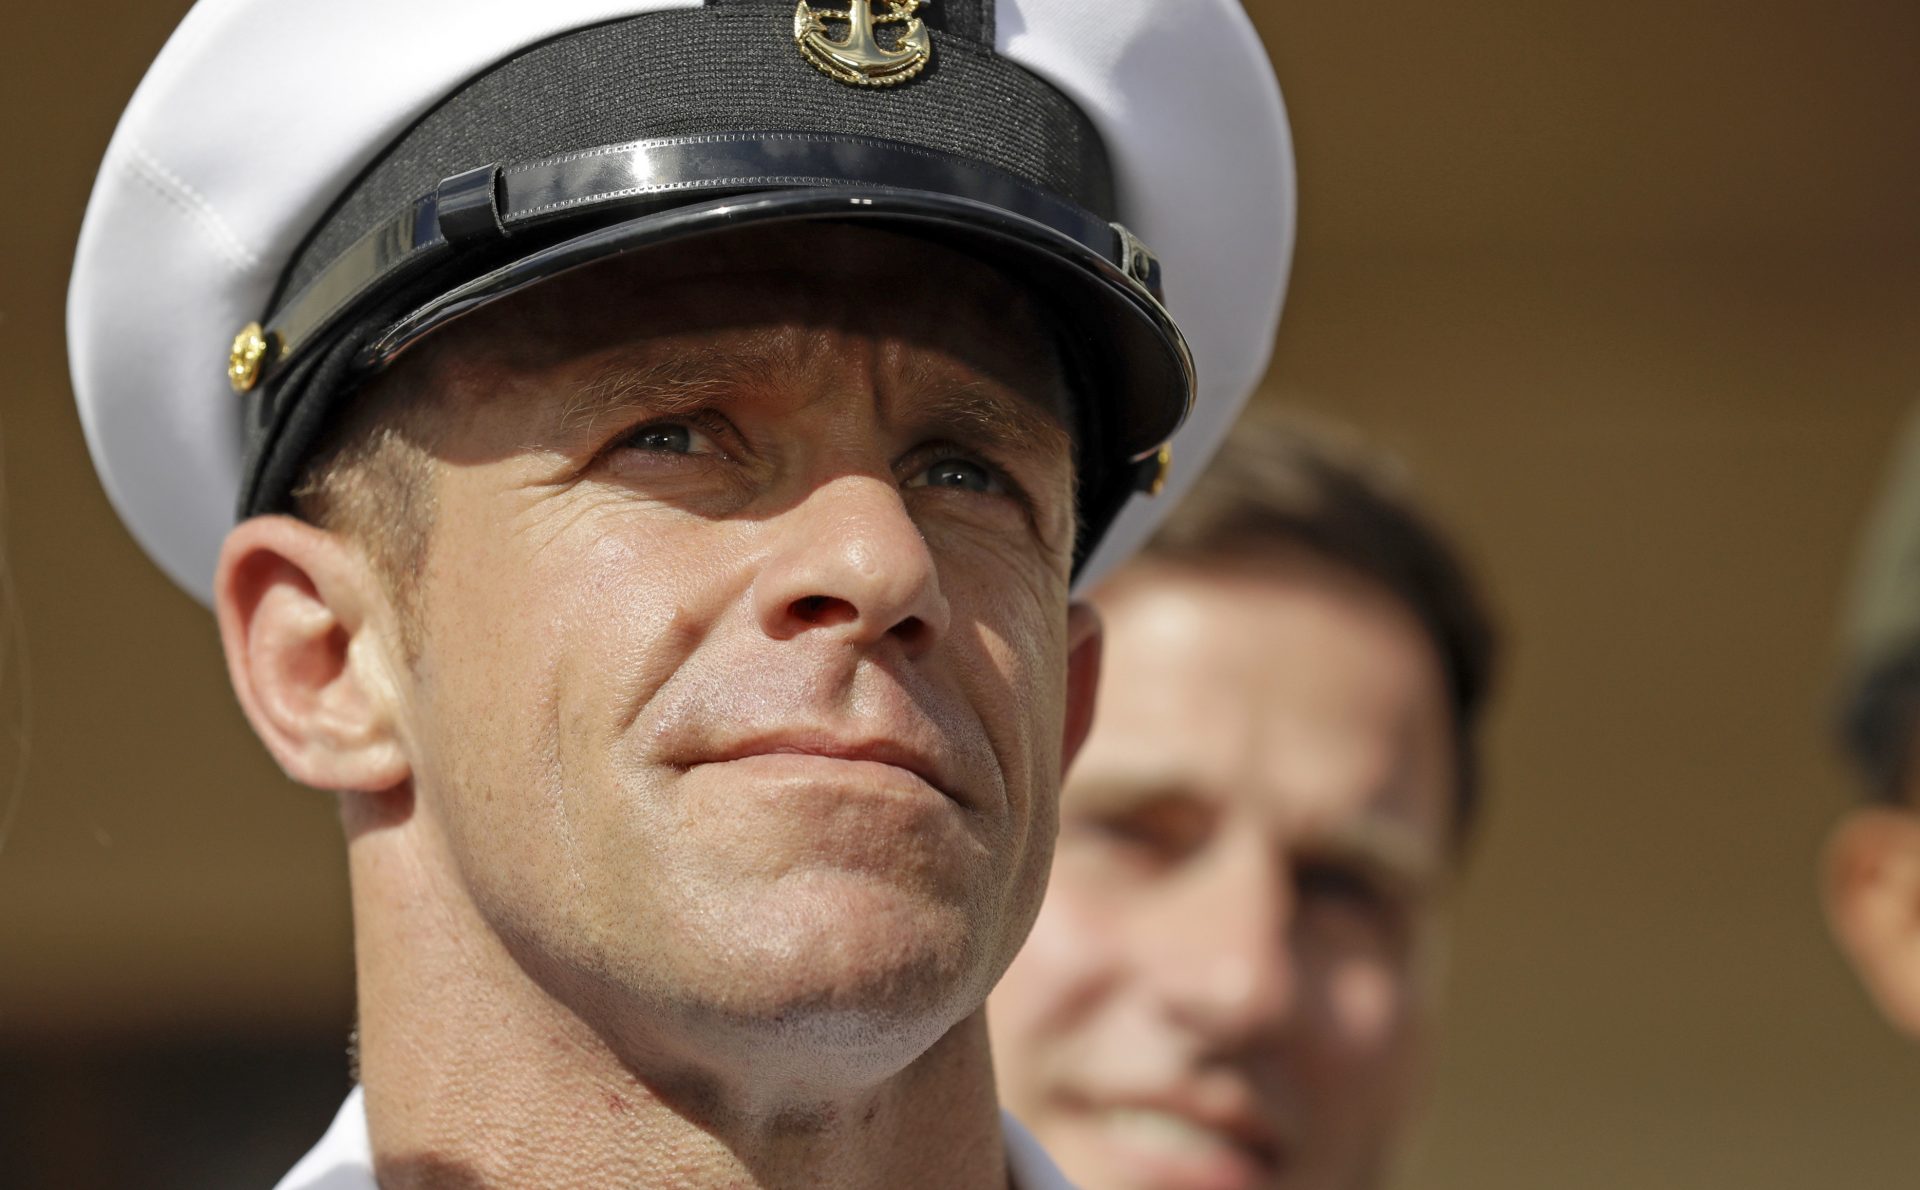 FILE PHOTO: In this Tuesday, July 2, 2019, file photo, Navy Special Operations Chief Edward Gallagher leaves a military court on Naval Base San Diego. On Tuesday, Oct. 29, 2019 the chief of naval operations denied a request for clemency and upheld a military jury's sentence that will reduce the rank of a Gallagher, a decorated Navy SEAL convicted of posing with a dead Islamic State captive in Iraq in 2017. Adm. Mike Gilday made the decision after carefully review of the trial and the arguments made by Navy SEAL Edward Gallagher's lawyers.